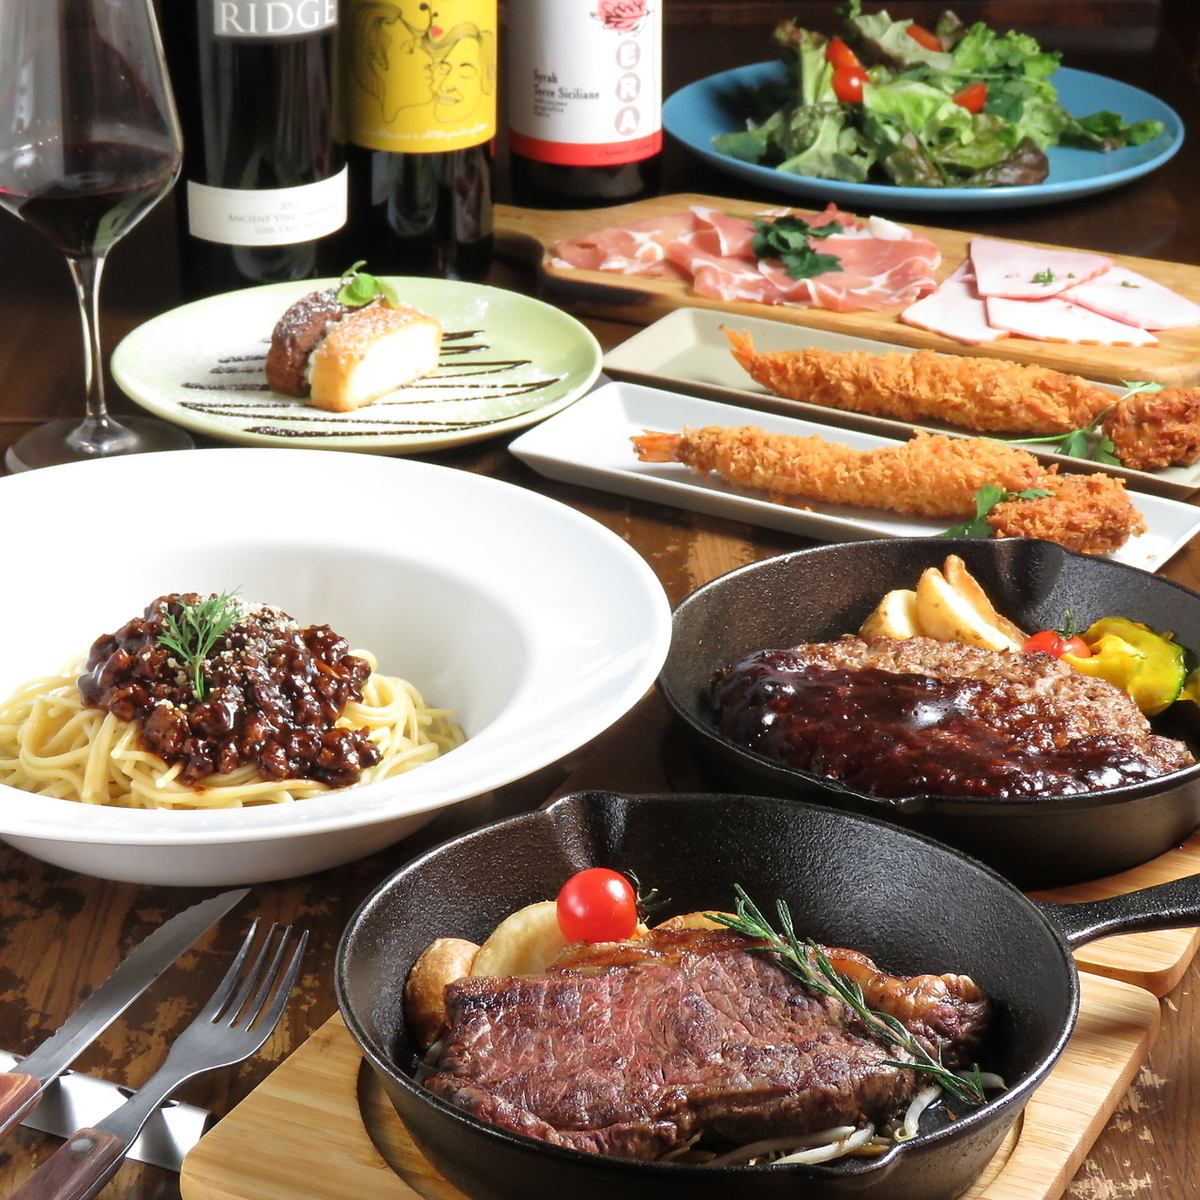 Private reservations are also possible! Enjoy delicious meat, wine, and alcoholic beverages.